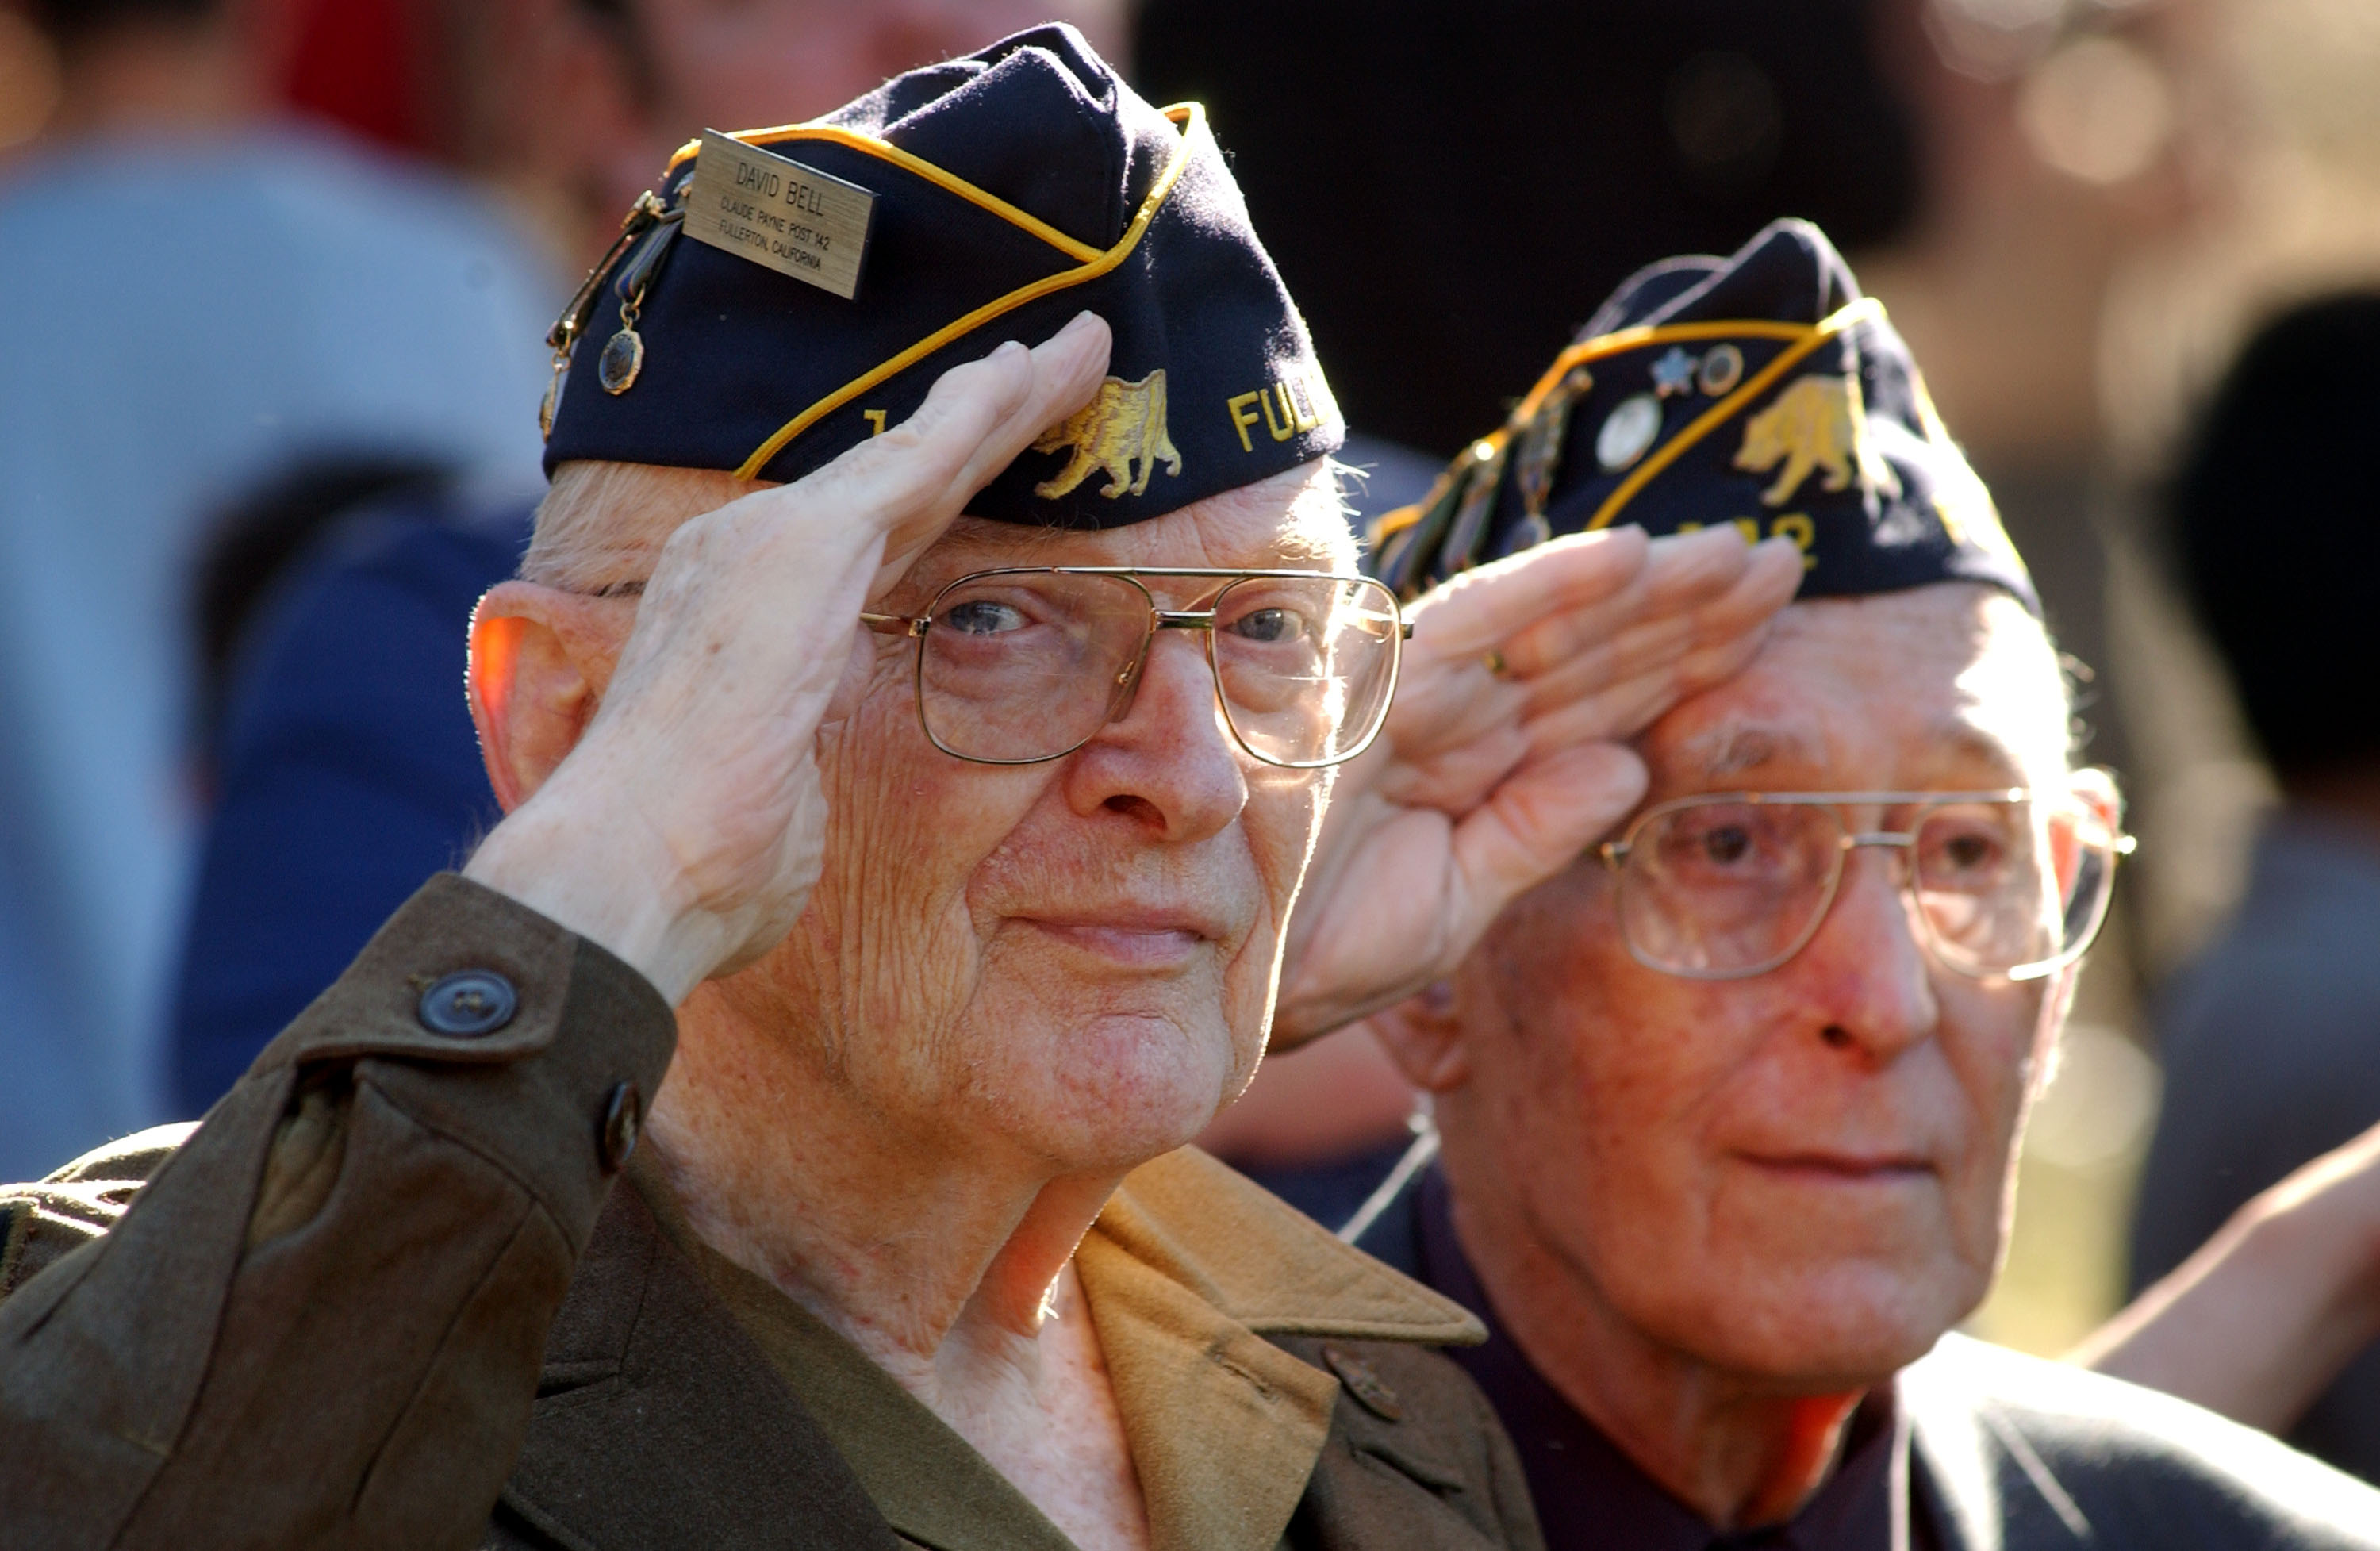 Startup aims to help aging veterans at home (Video)